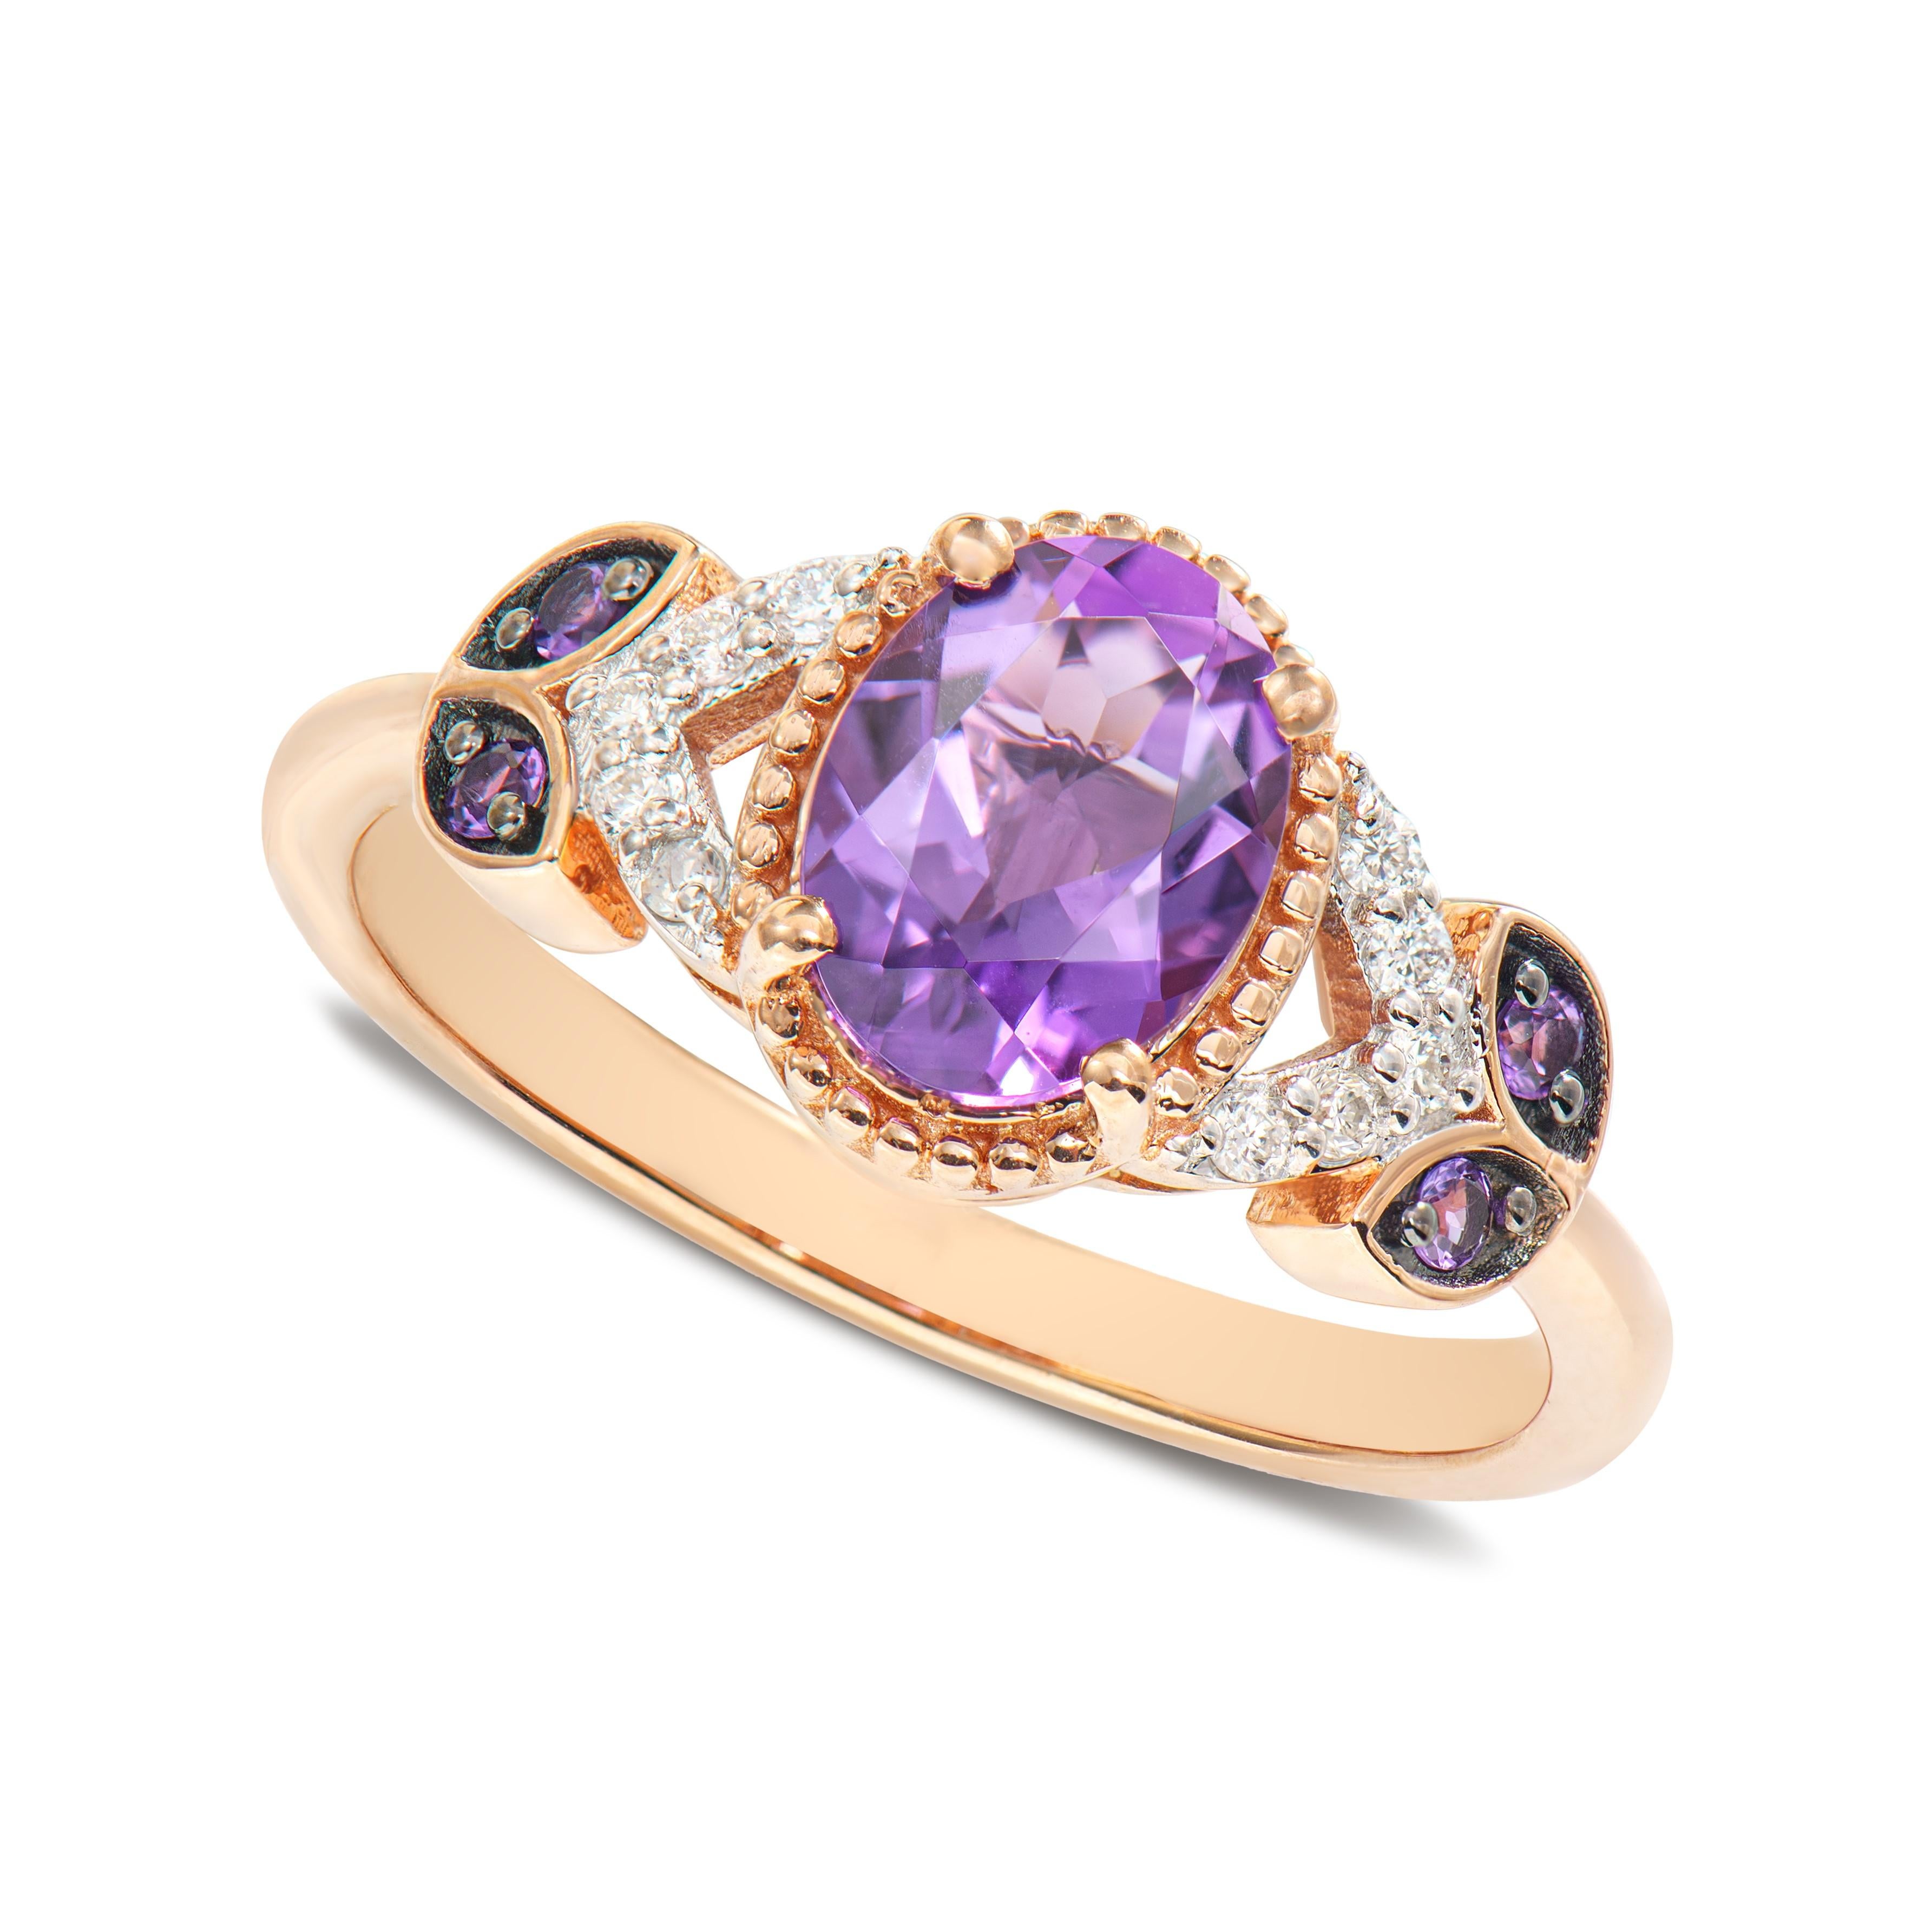 Contemporary 1.02 Carat Amethyst Fancy Ring in 14Karat Rose Gold with White Diamond.   For Sale